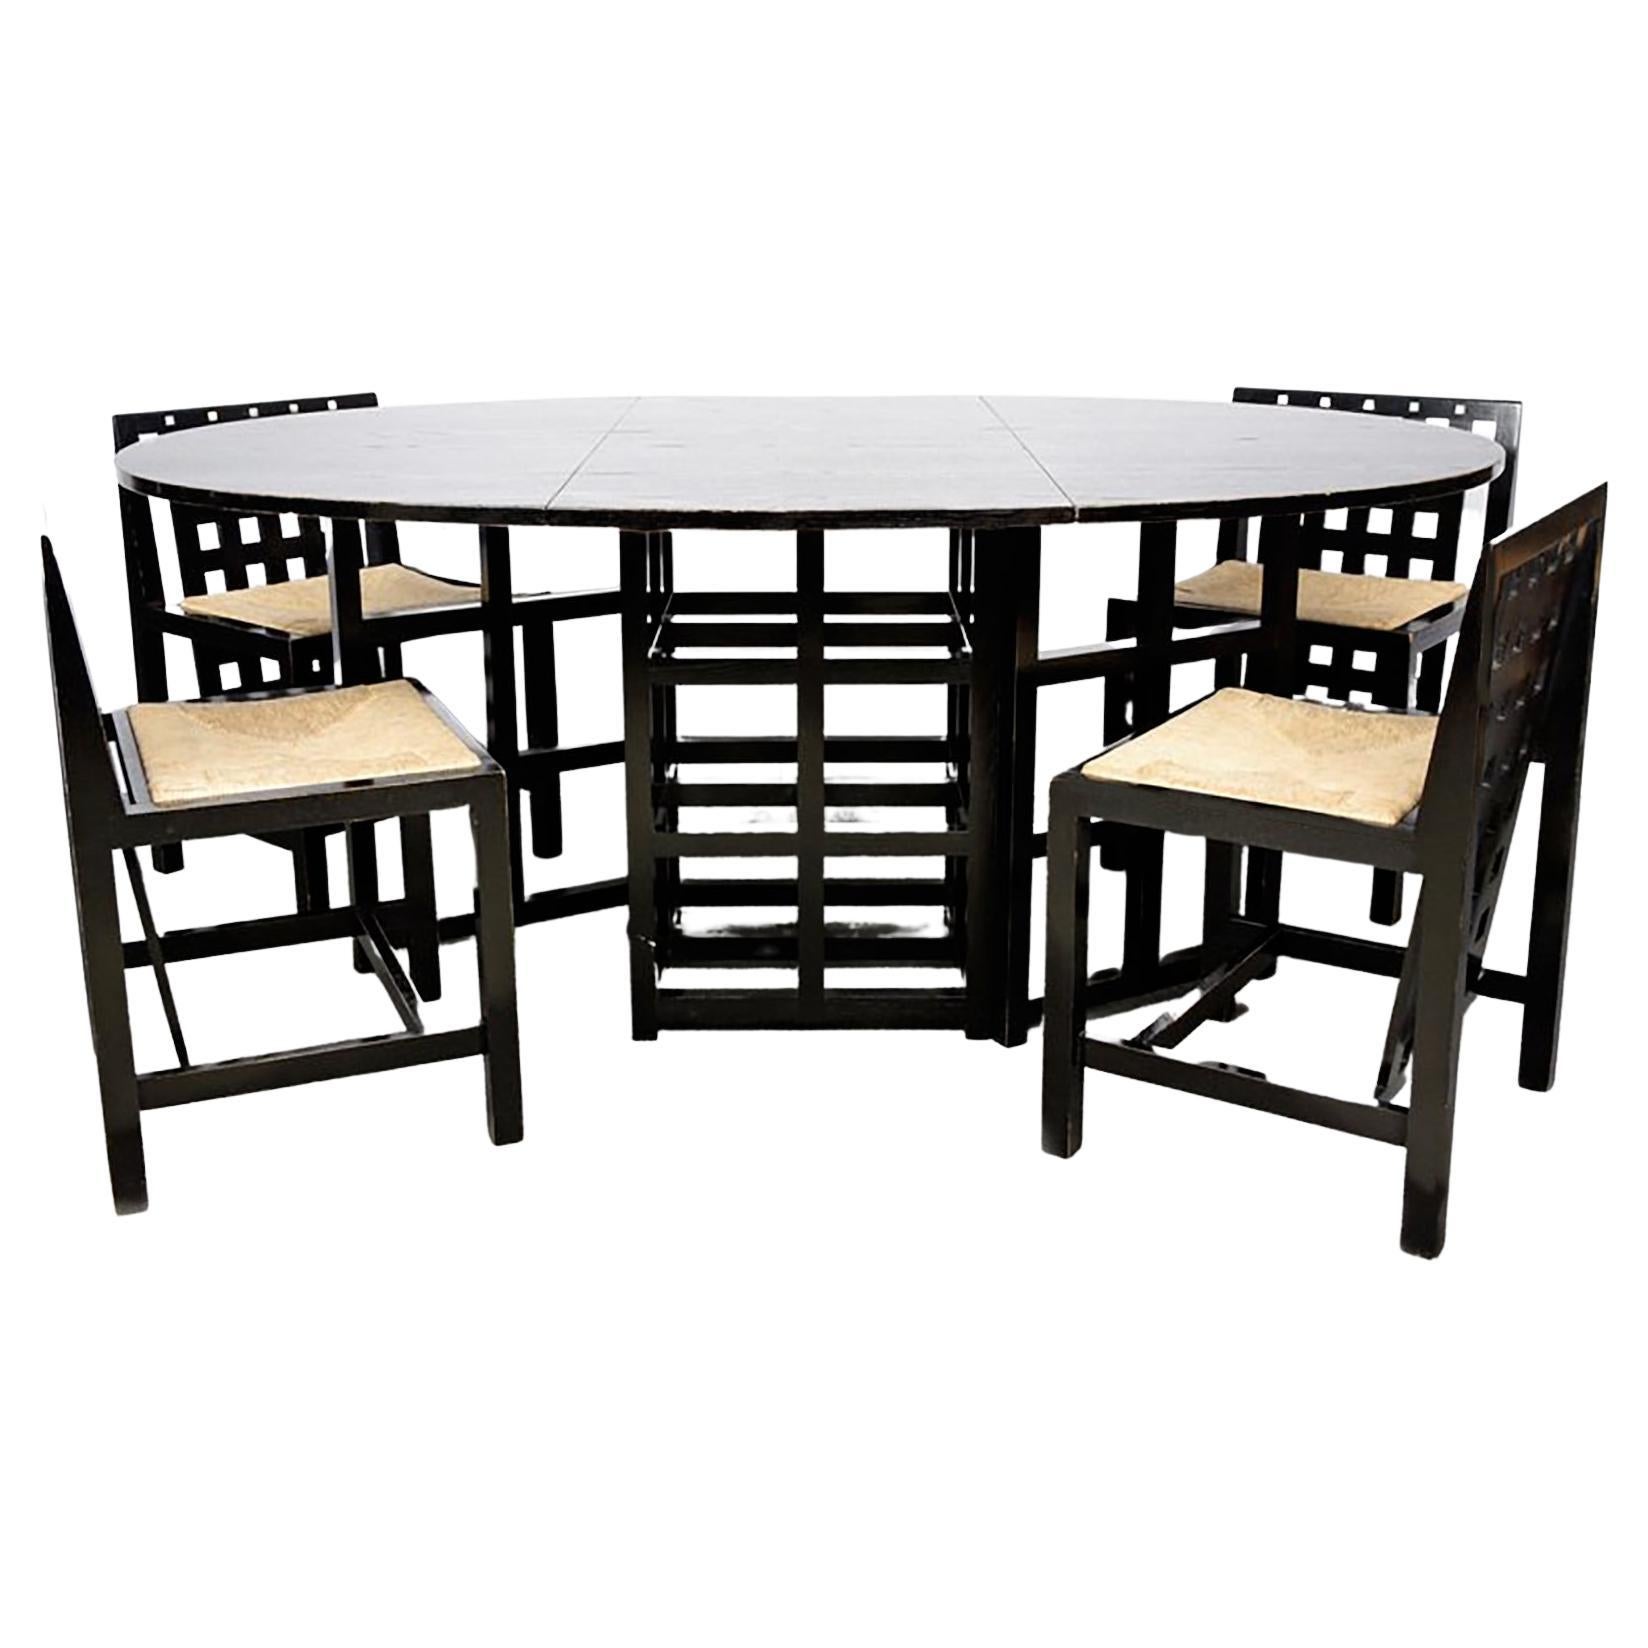 1970s Italian Black Oval Folding Table and Four Chairs designed by Mackintosh  For Sale